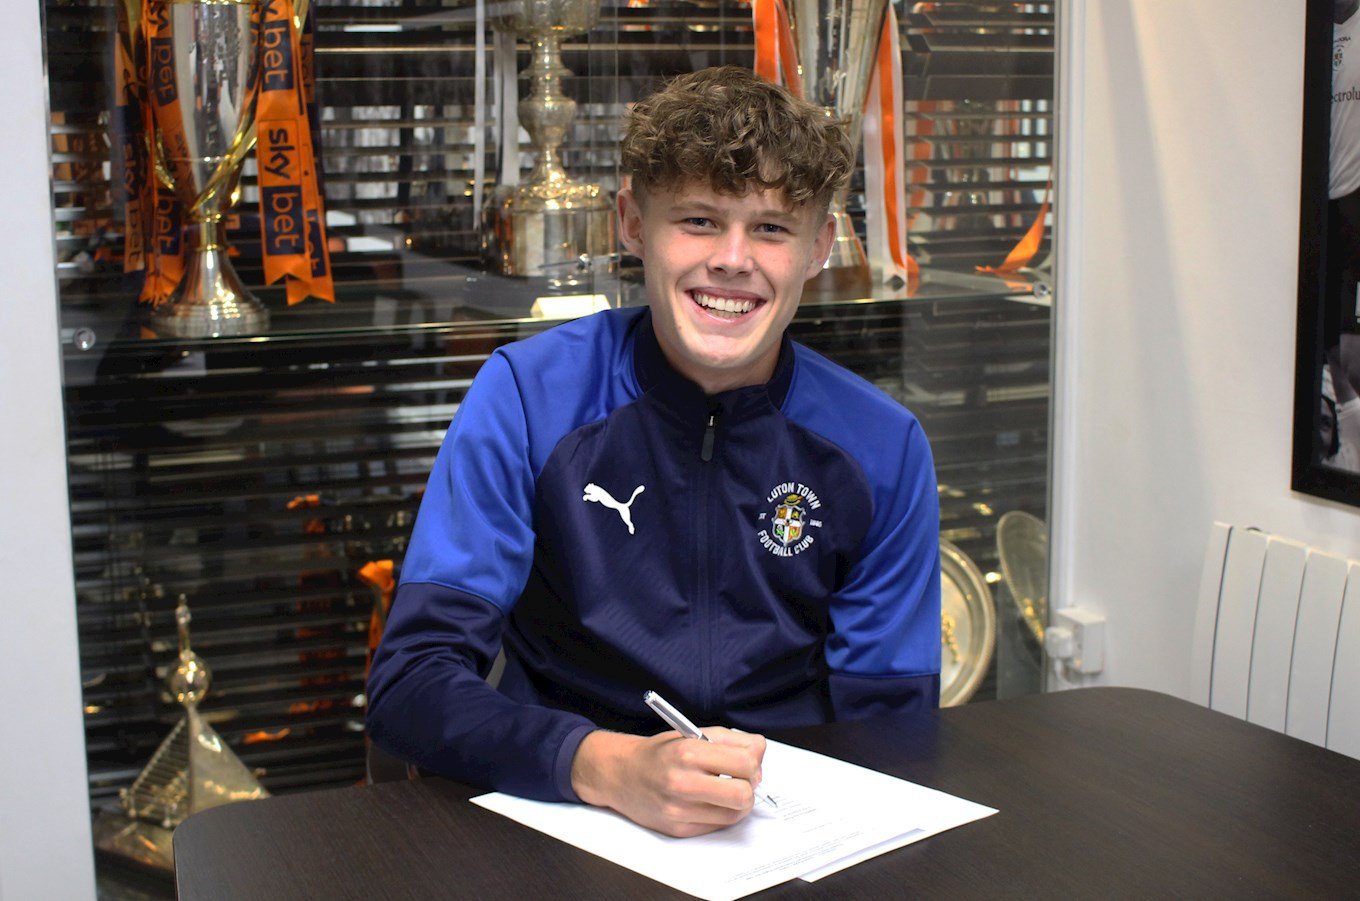 Having turned 17 in October, Sam puts pen to paper on his first professional contract